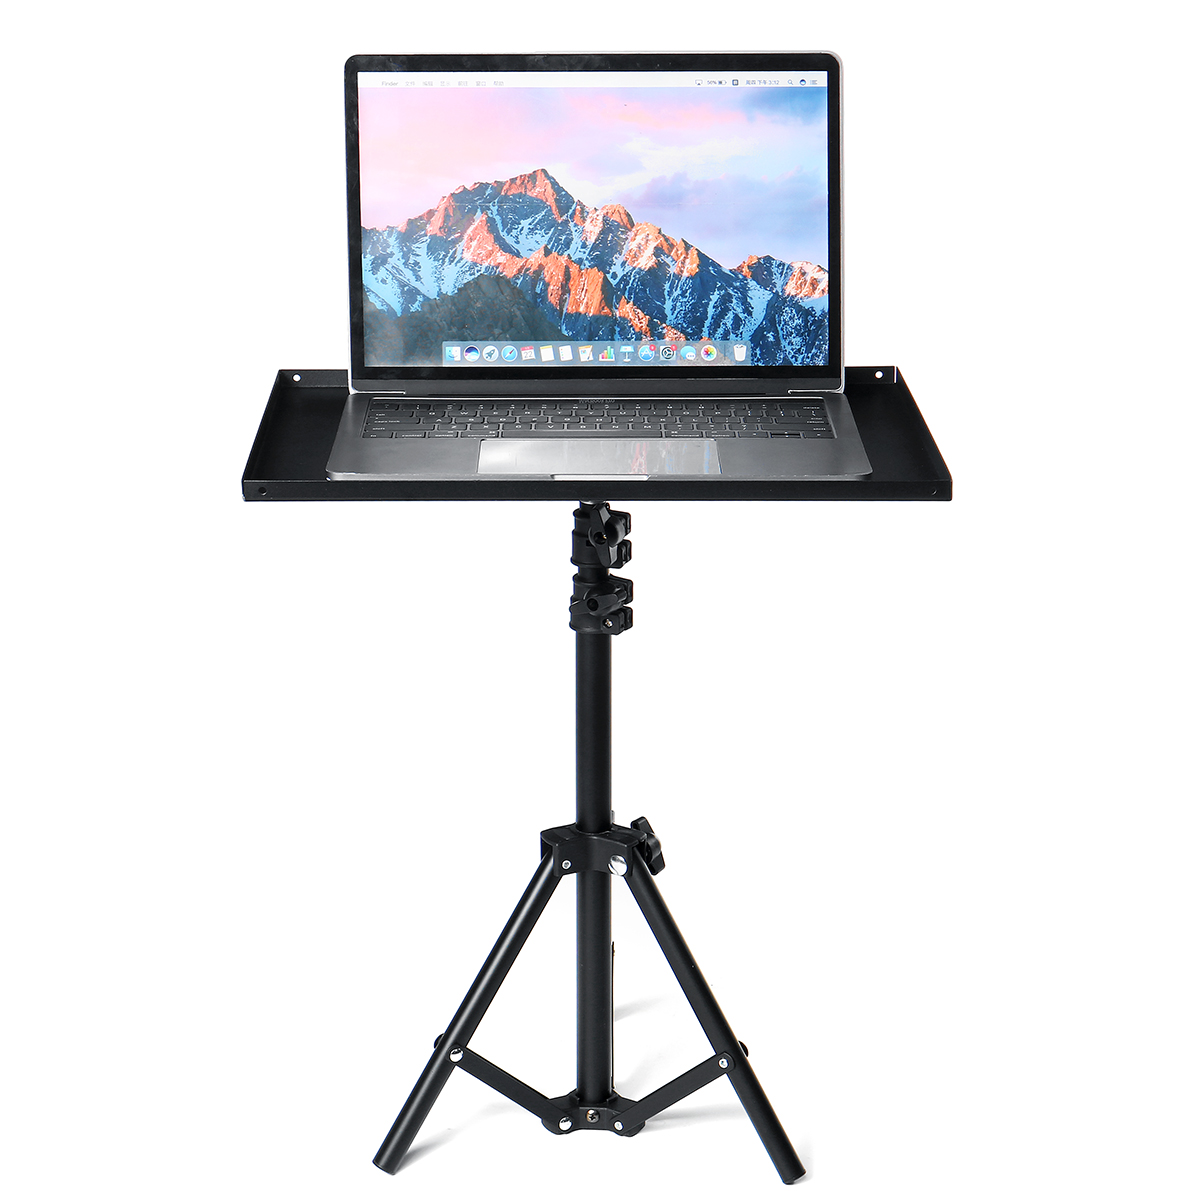 Find 1pc Projector Laptop Stand Portable Camera Stand Tray Tripod Adjustable Notebook Computer Stand Home Yard Outdoor Projector Supplies for Sale on Gipsybee.com with cryptocurrencies